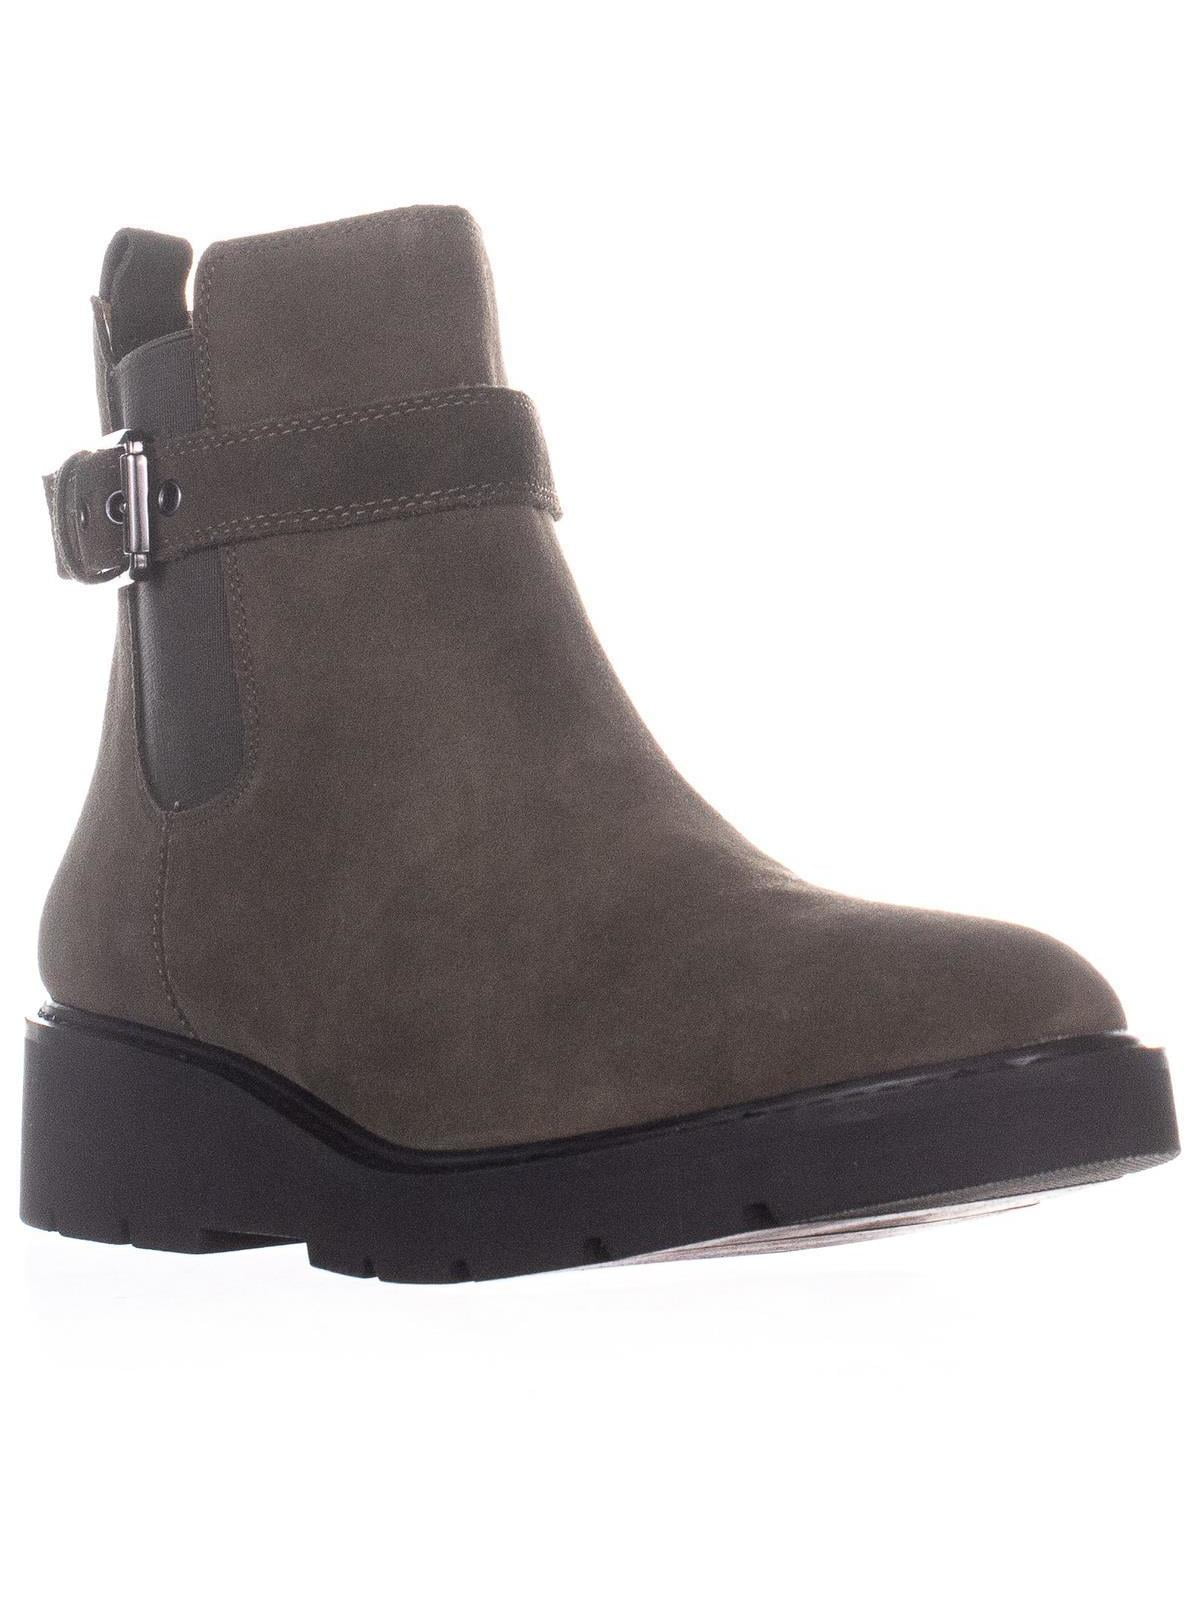 franco sarto suede ankle boots